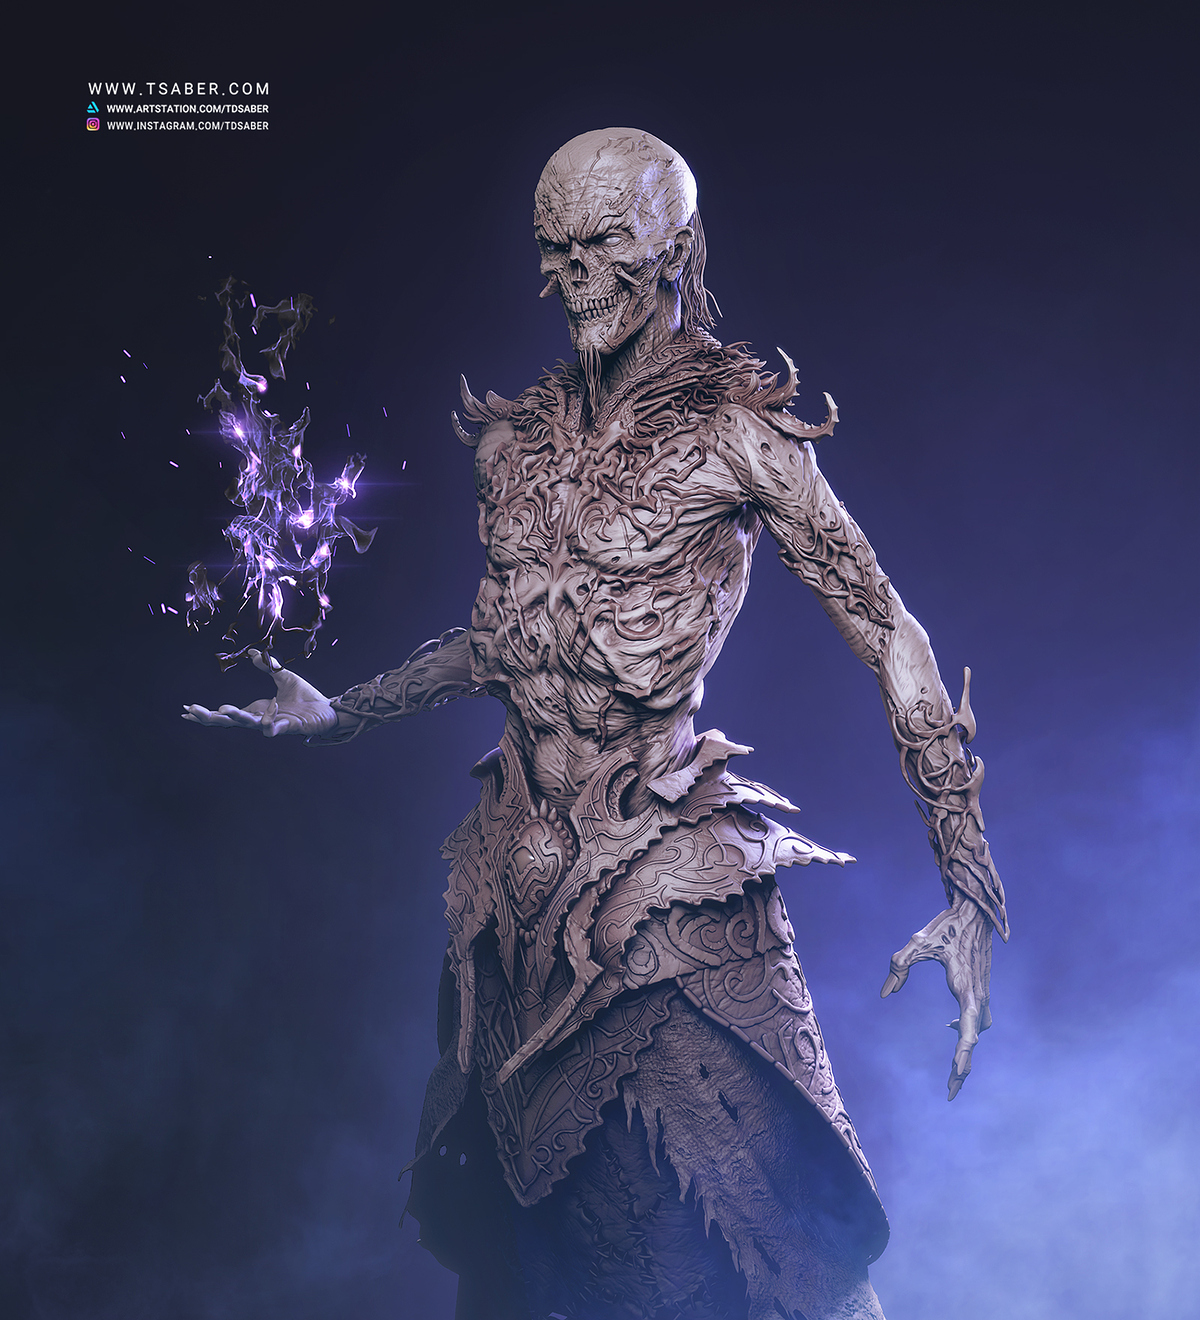 Undead mage Zbrush clay sculpture - Tsaber